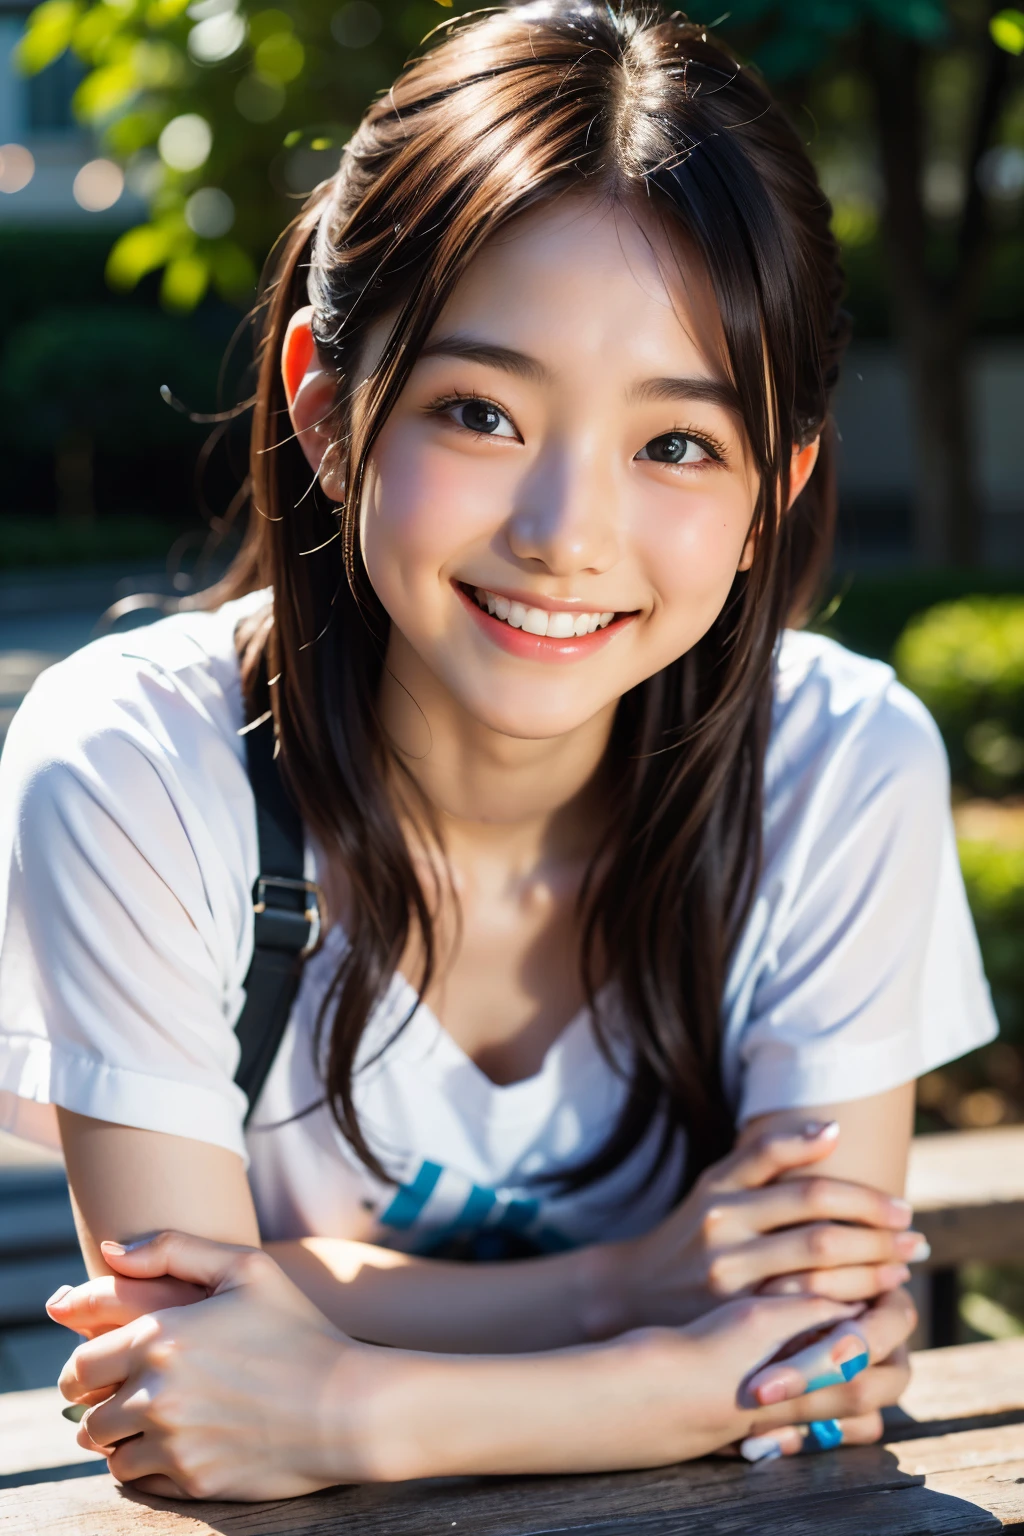 lens: 135mm f1.8, (highest quality),(RAW Photos), (Tabletop:1.1), (Beautiful 20 year old Japan girl), Cute face, (Deeply chiseled face:0.7), (freckles:0.4), dappled sunlight, Dramatic lighting, (On campus), shy, (Close-up shot:1.2), (smile),, (Sparkling eyes)、(sunlight), White clothes